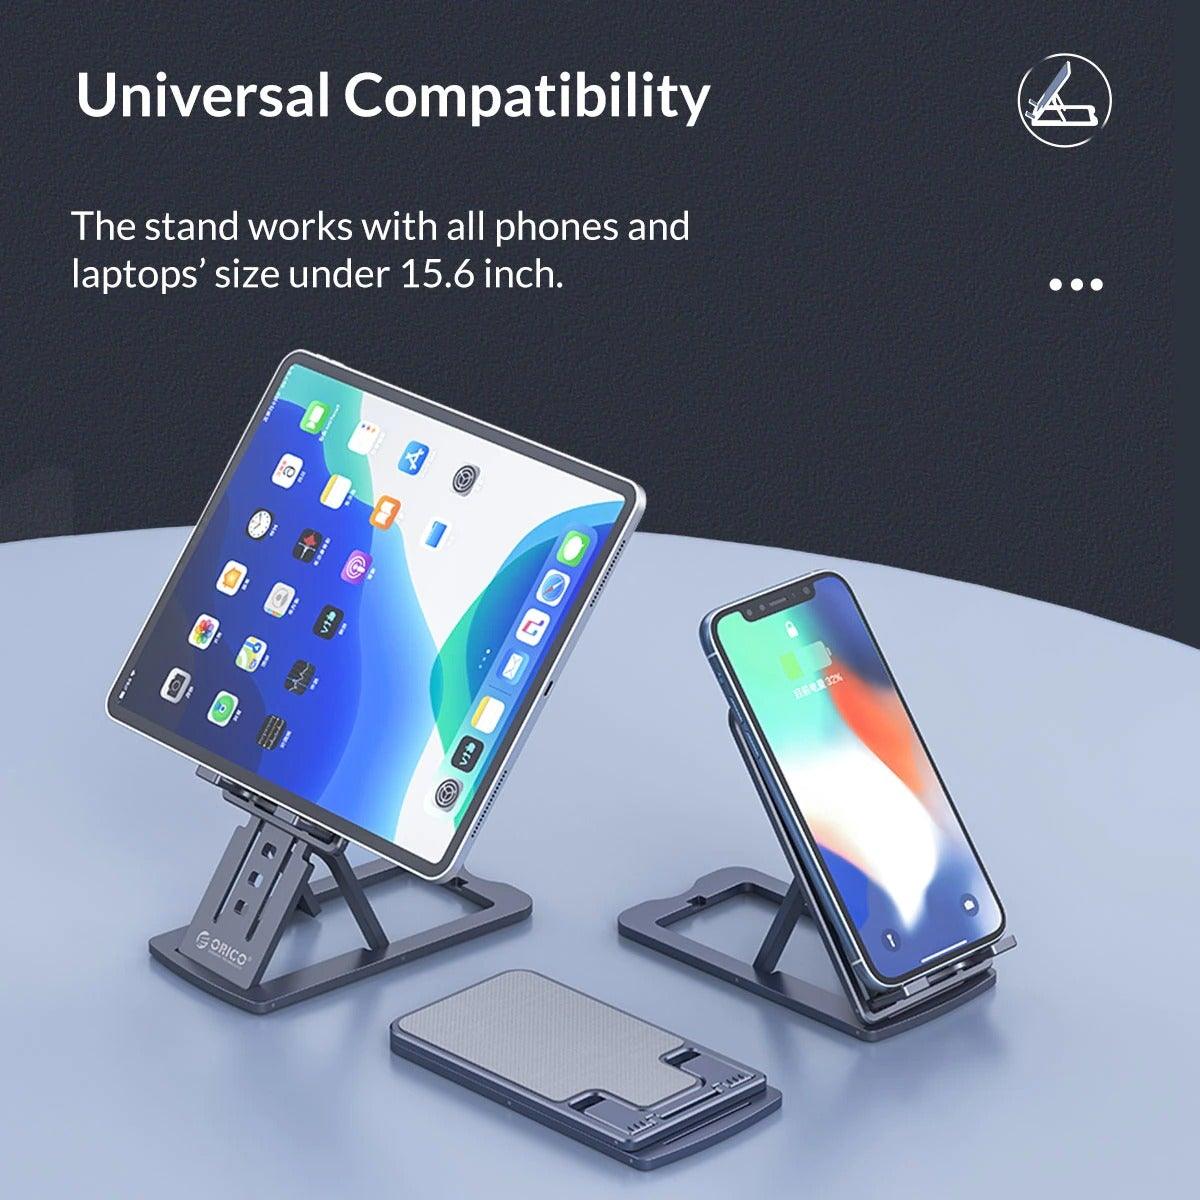 Universal Stand - HOW DO I BUY THIS Silver